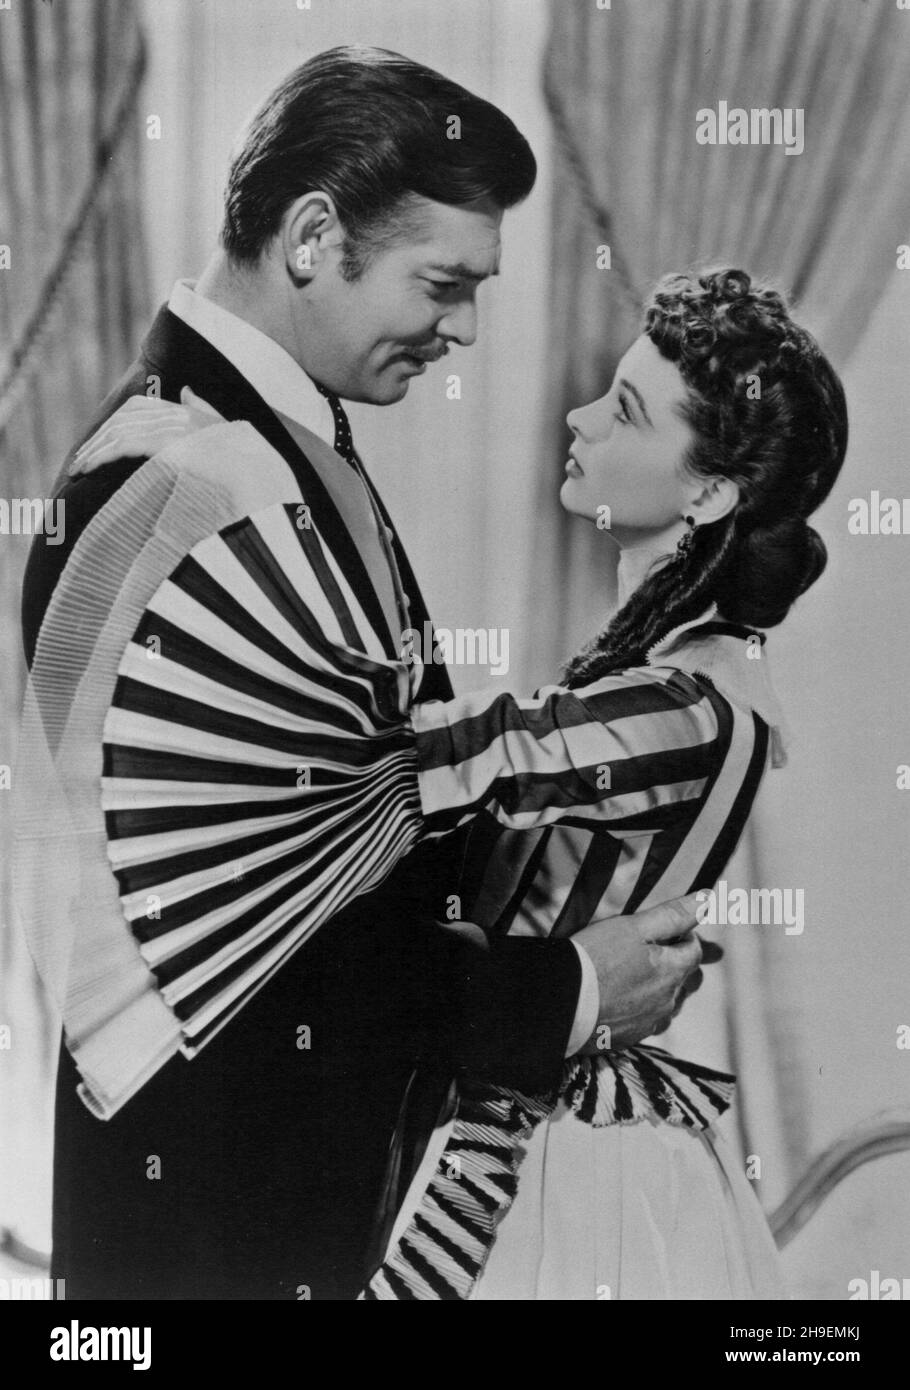 RELEASE DATE: 15 December 1939 TITLE: Gone with the Wind STUDIO: Metro-Goldwyn-Mayer DIRECTOR: Victor Fleming PLOT: The manipulative daughter of a Georgia plantation owner conducts a turbulent romance with a roguish profiteer during the American Civil War and Reconstruction periods. STARRING: CLARK GABLE as Rhett Butler and VIVIEN LEIGH as Scarlett. (Credit Image: ©Metro-Goldwyn-Mayer/Entertainment Pictures) Stock Photo